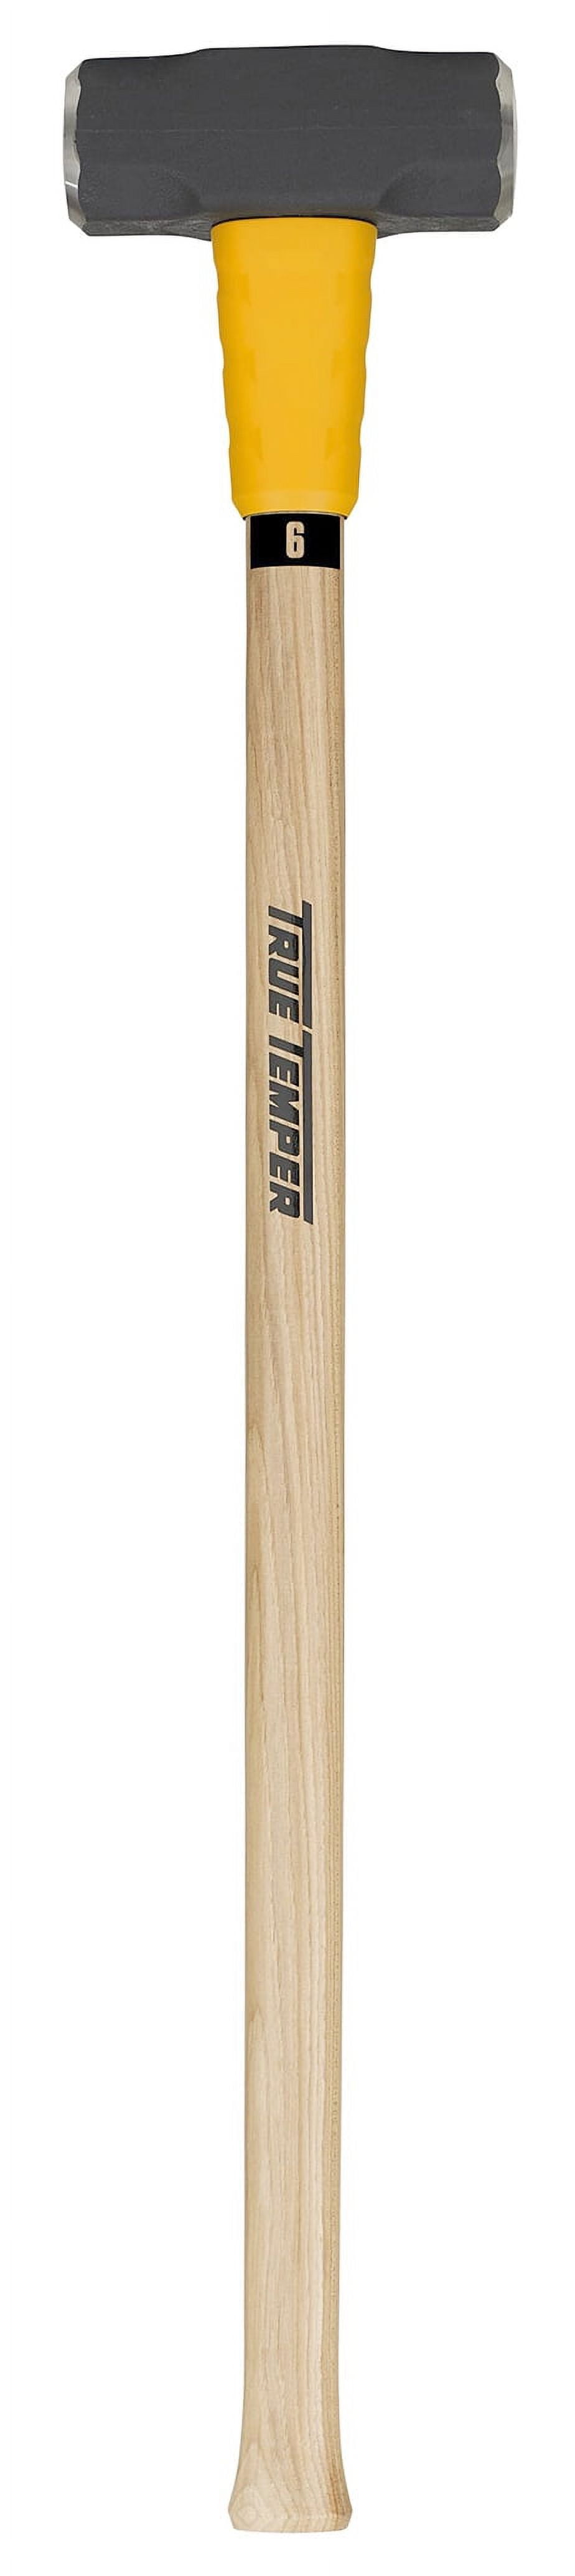 Picture of Ames True Temper 20184800 6 lbs Hickory Handle Sledge Hammer